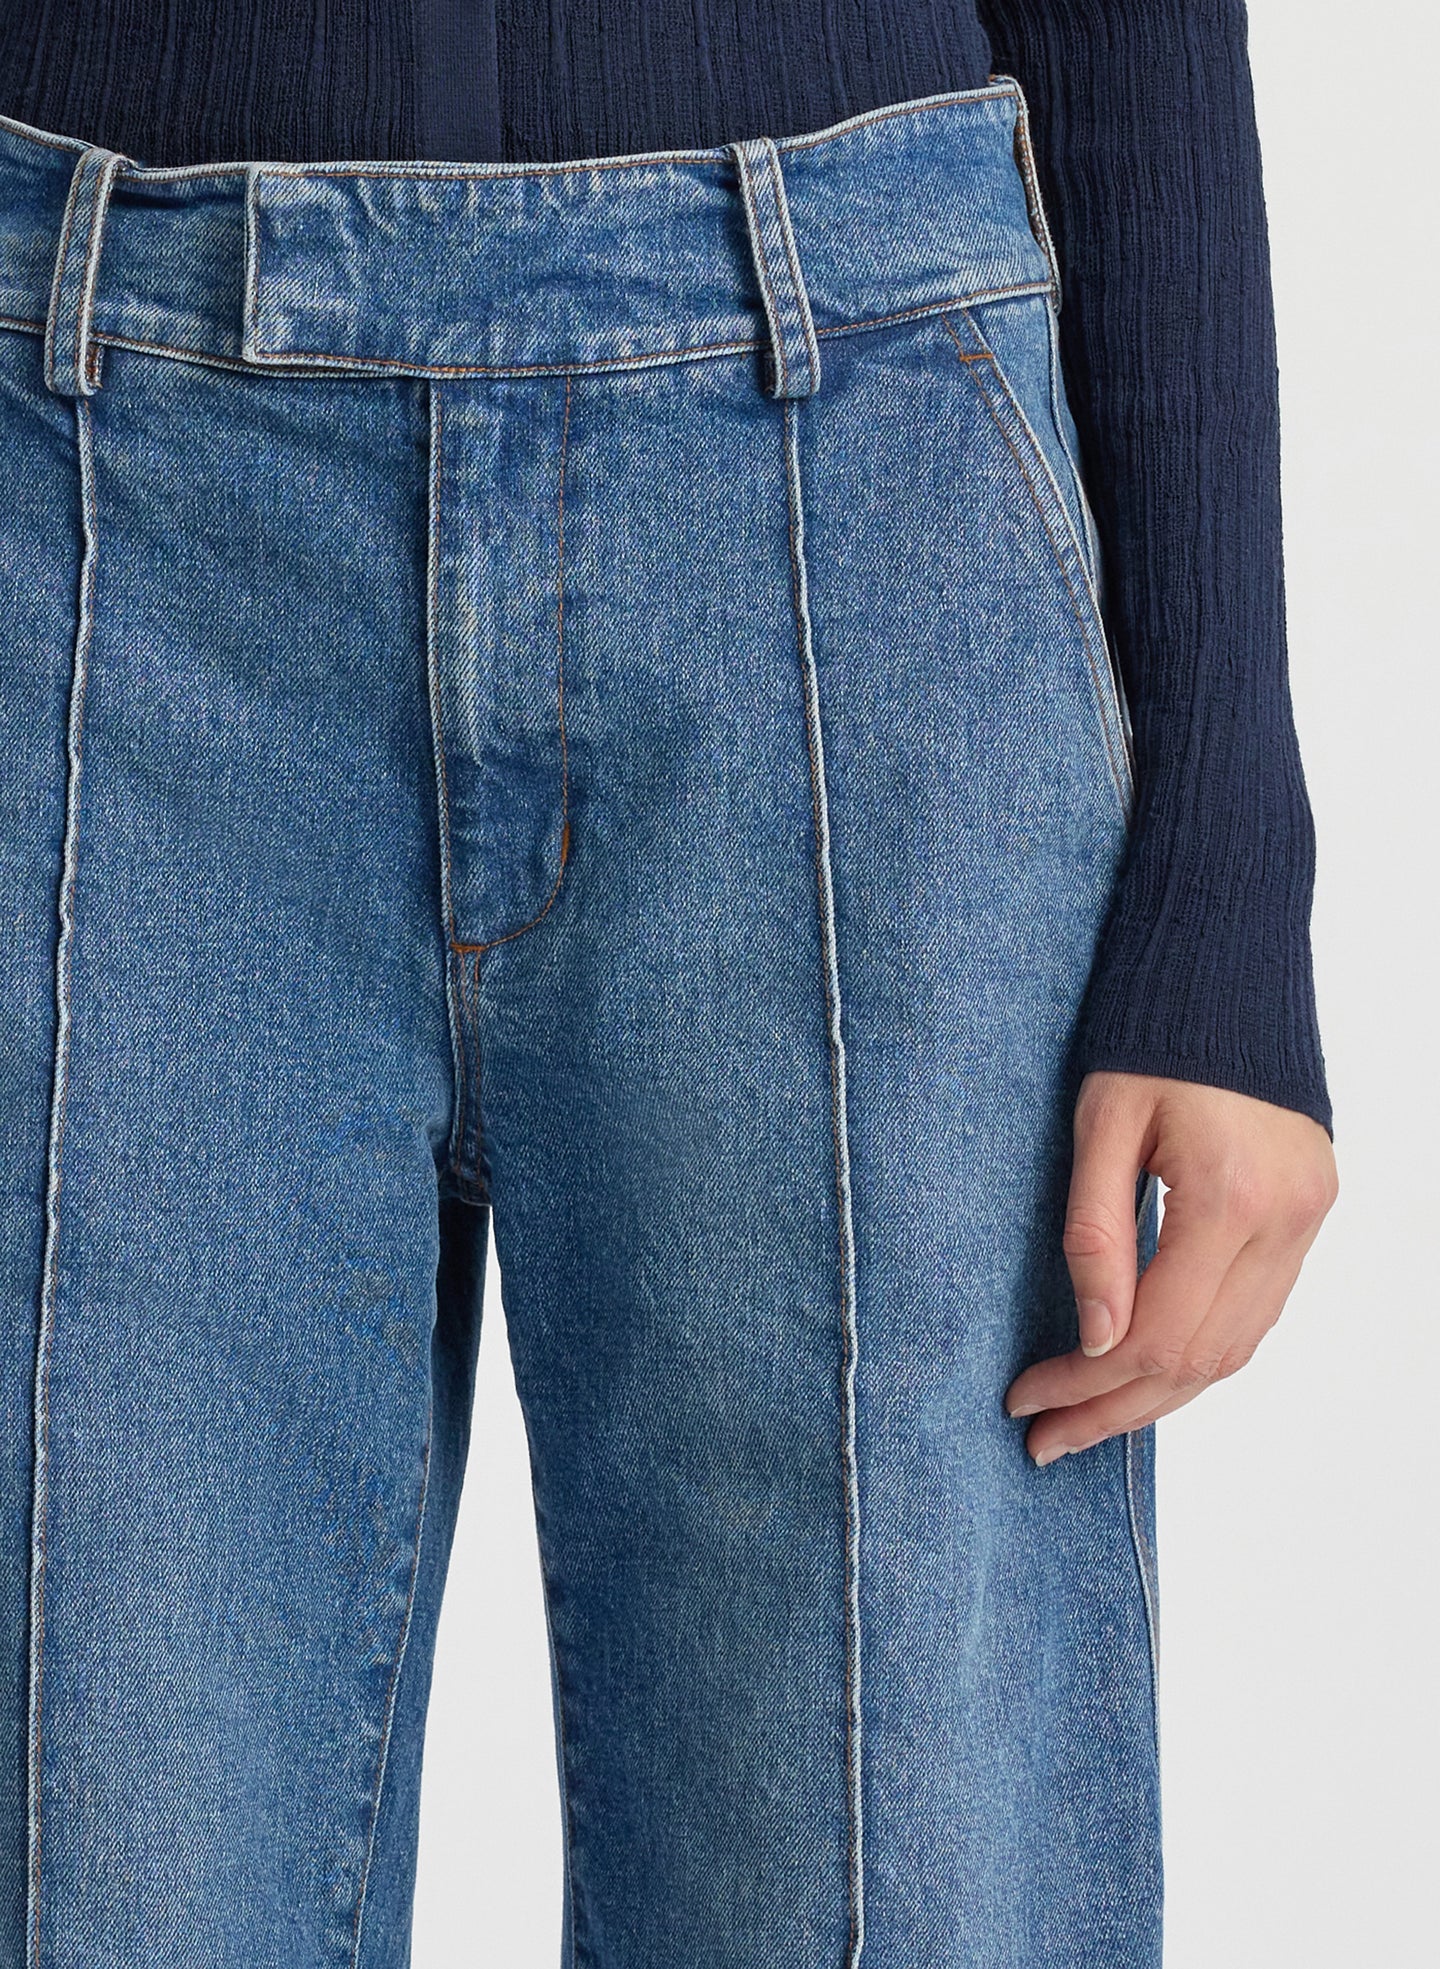 detail view of woman wearing navy blue cardigan and medium blue wash wide leg denim jeans